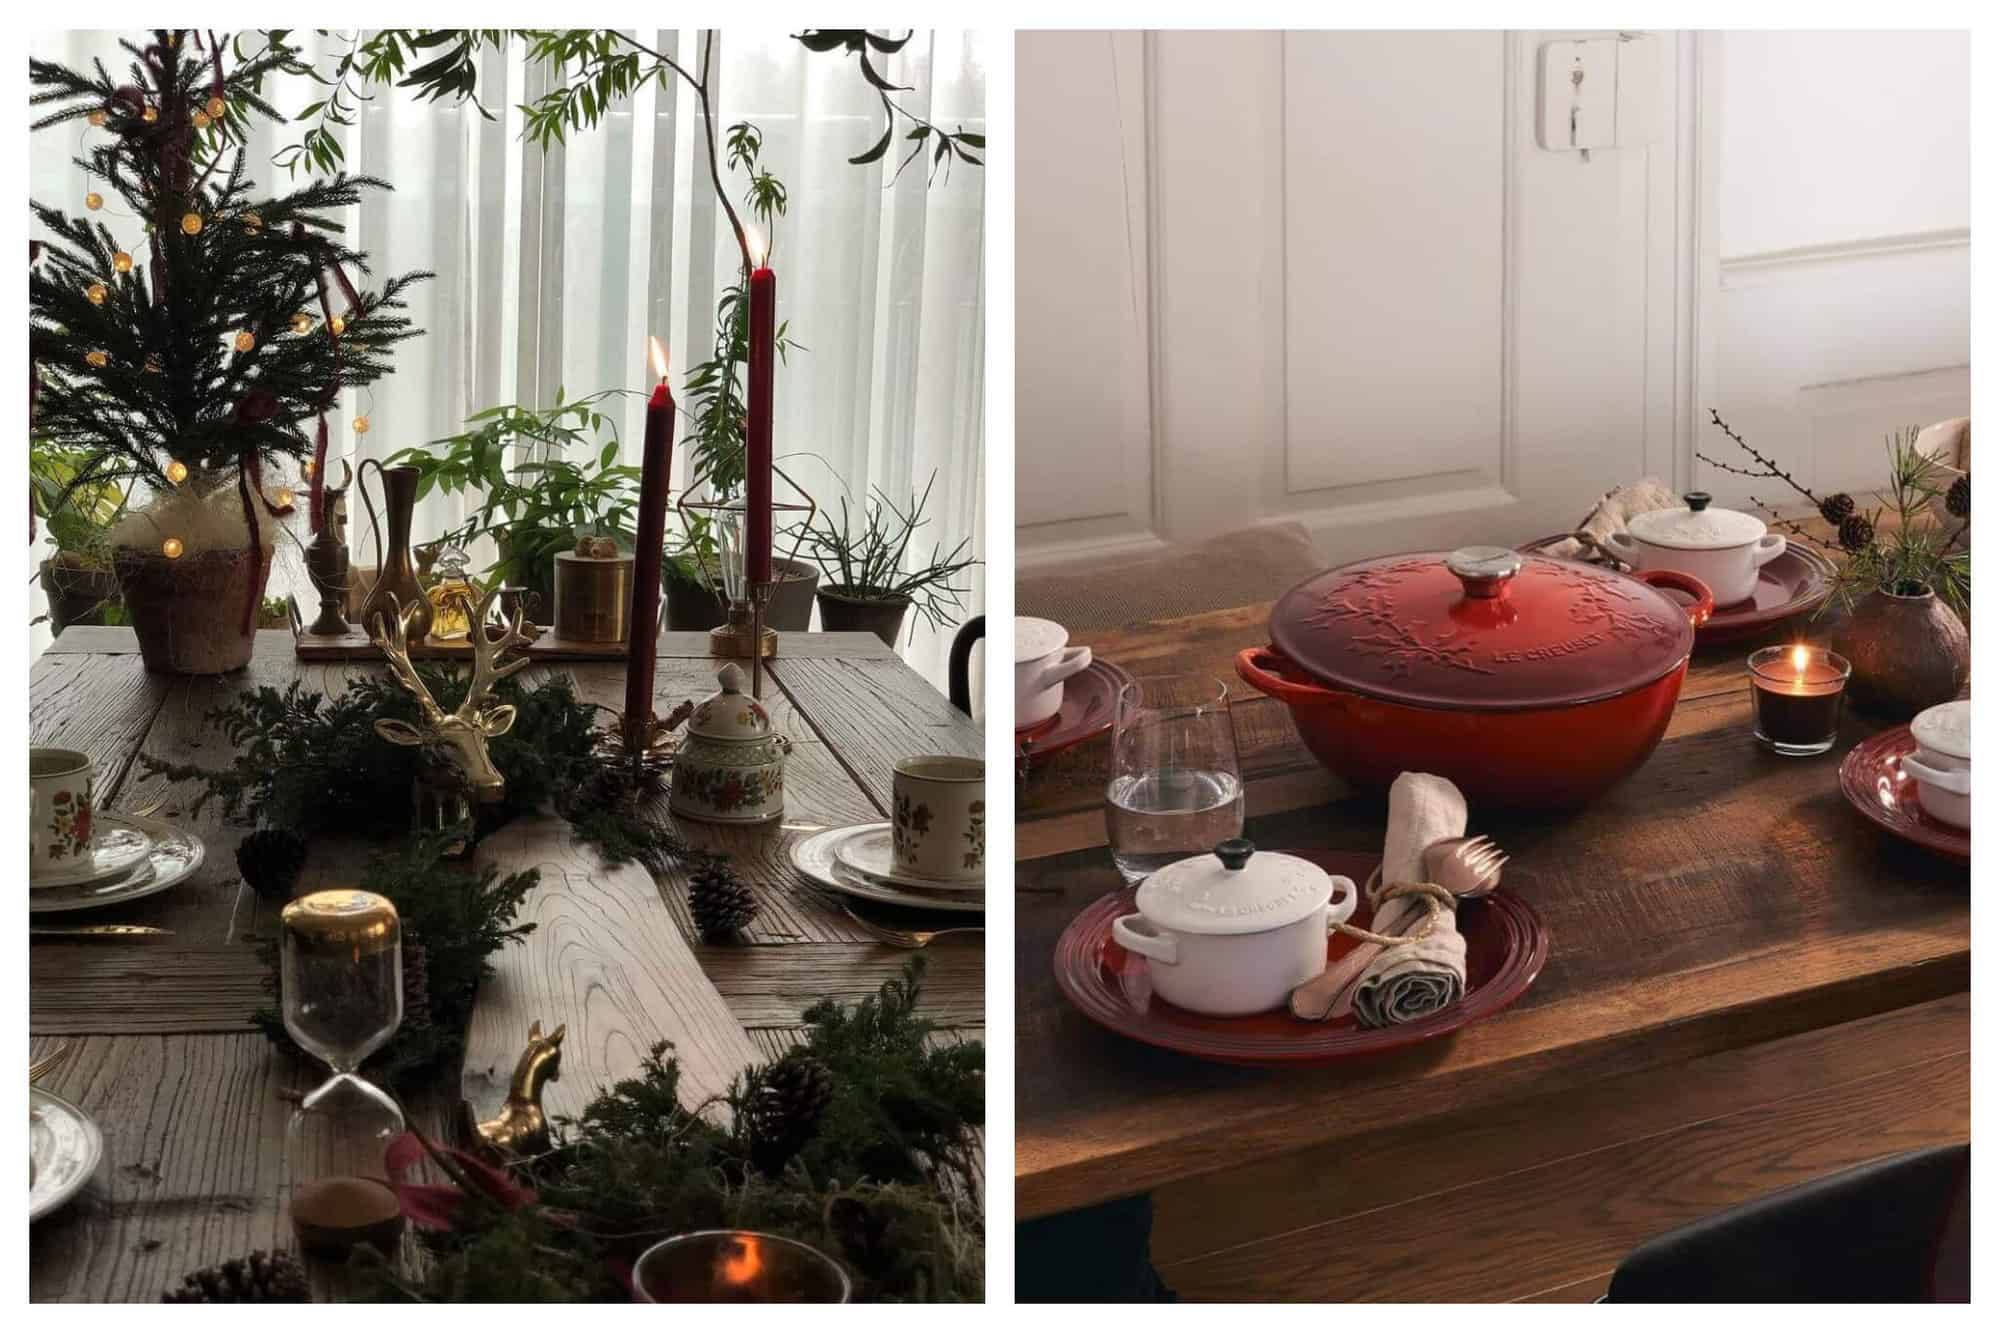 Left: a table set for a Christmas eal. There are several place settings with coffee cups. There are several sprigs of pine, red candles that are lit, and reindeer made out of gold. There is a bouquet of pine branches in the top left corner. Right: a table set for a Christmas dinner. there are four place settings with red plates and mini white casserole pots. There is a small lit candle and a small bouquet of pine branches next to a large red casserole in the center of the table.